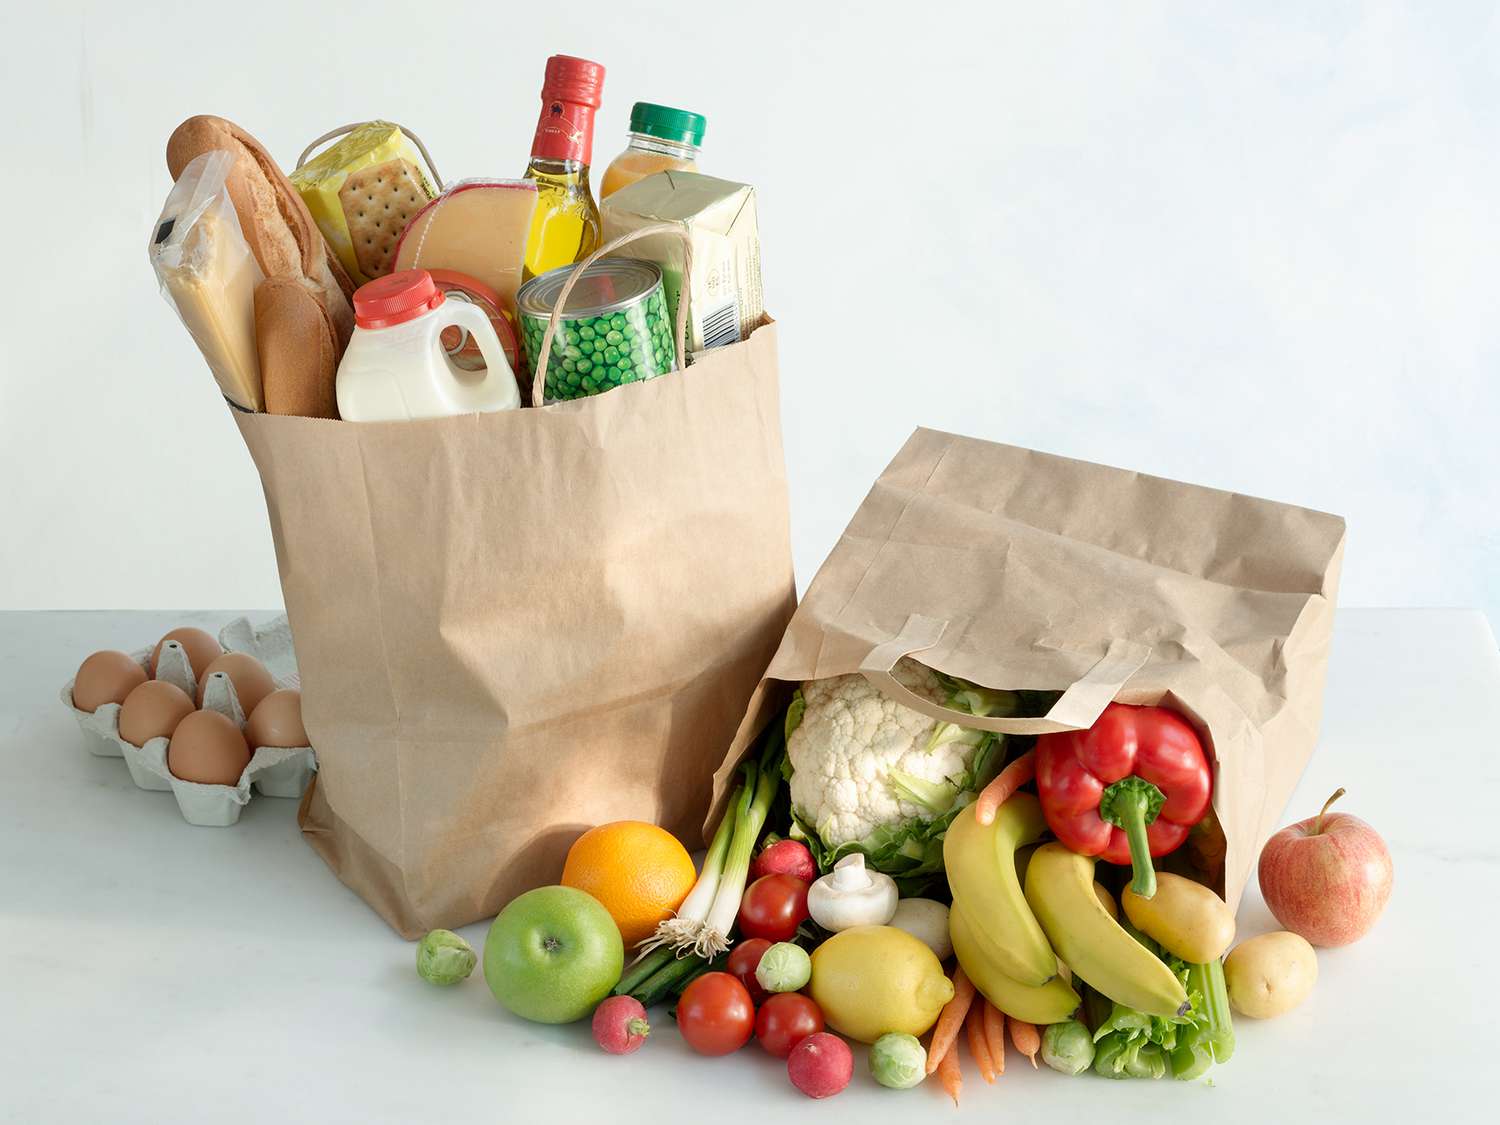 grocery bags with produce and other foods